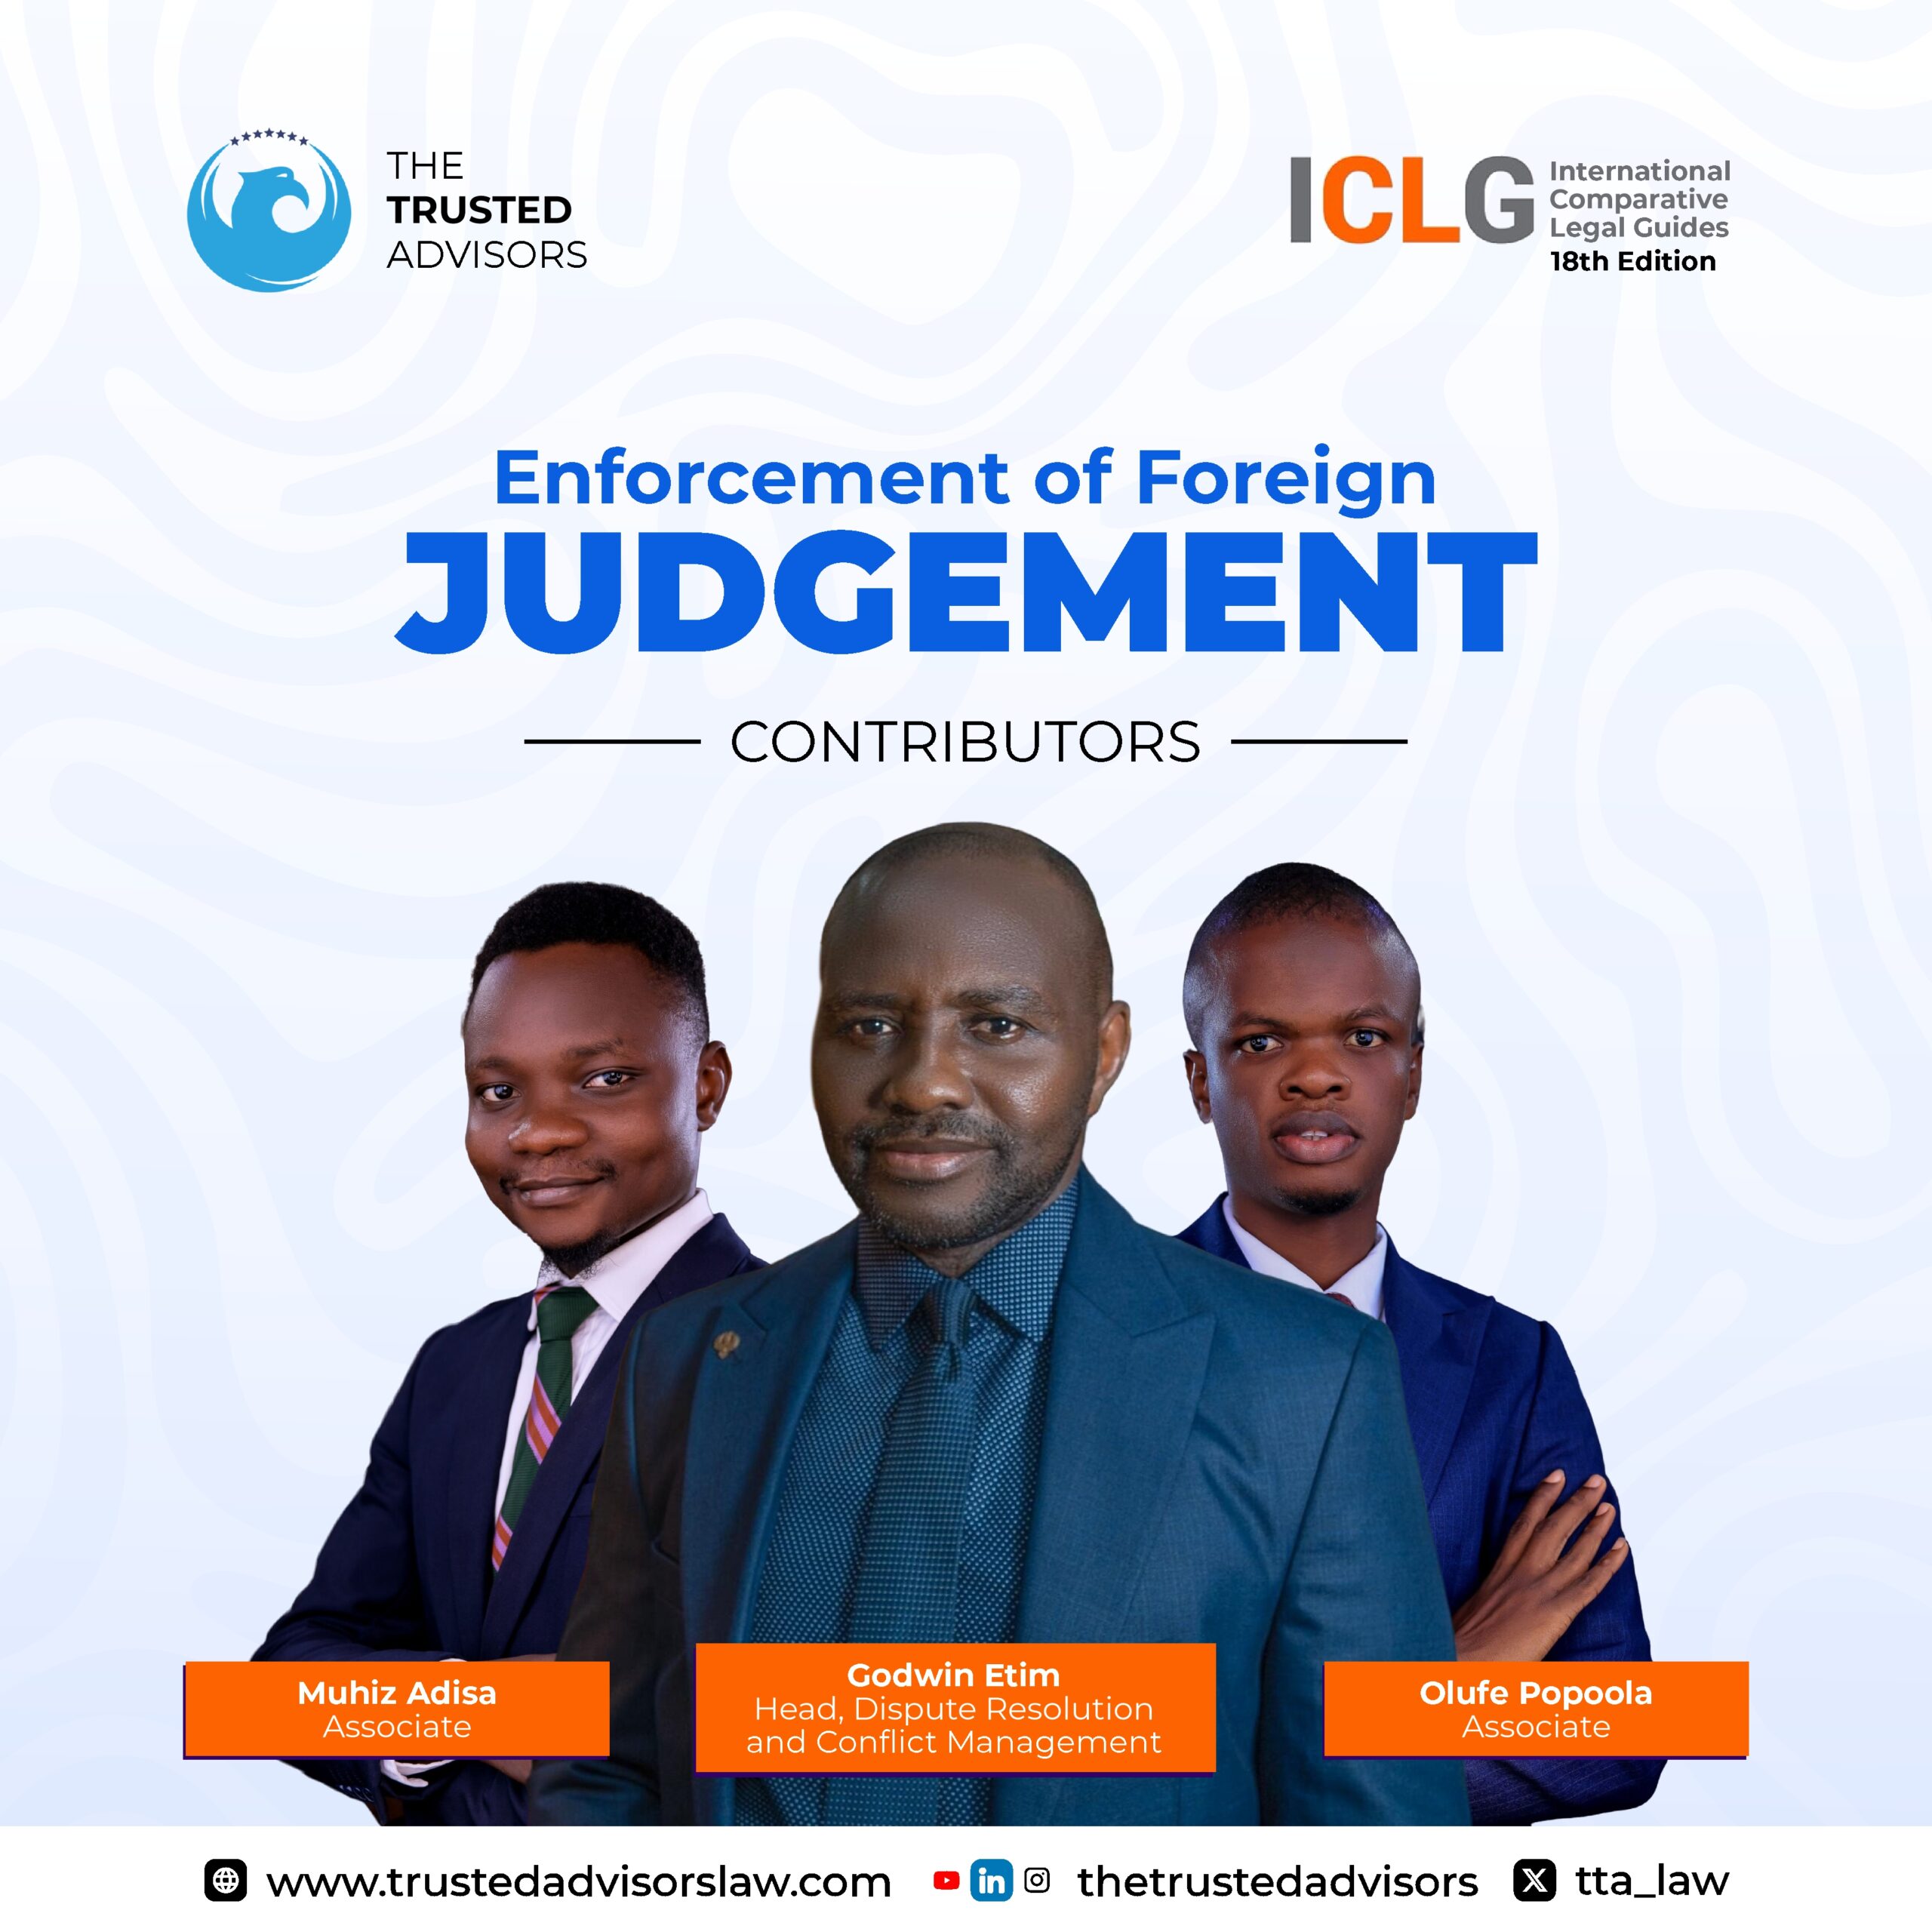 Enforcement of foreign judgement in Nigeria by The Trusted Advisors